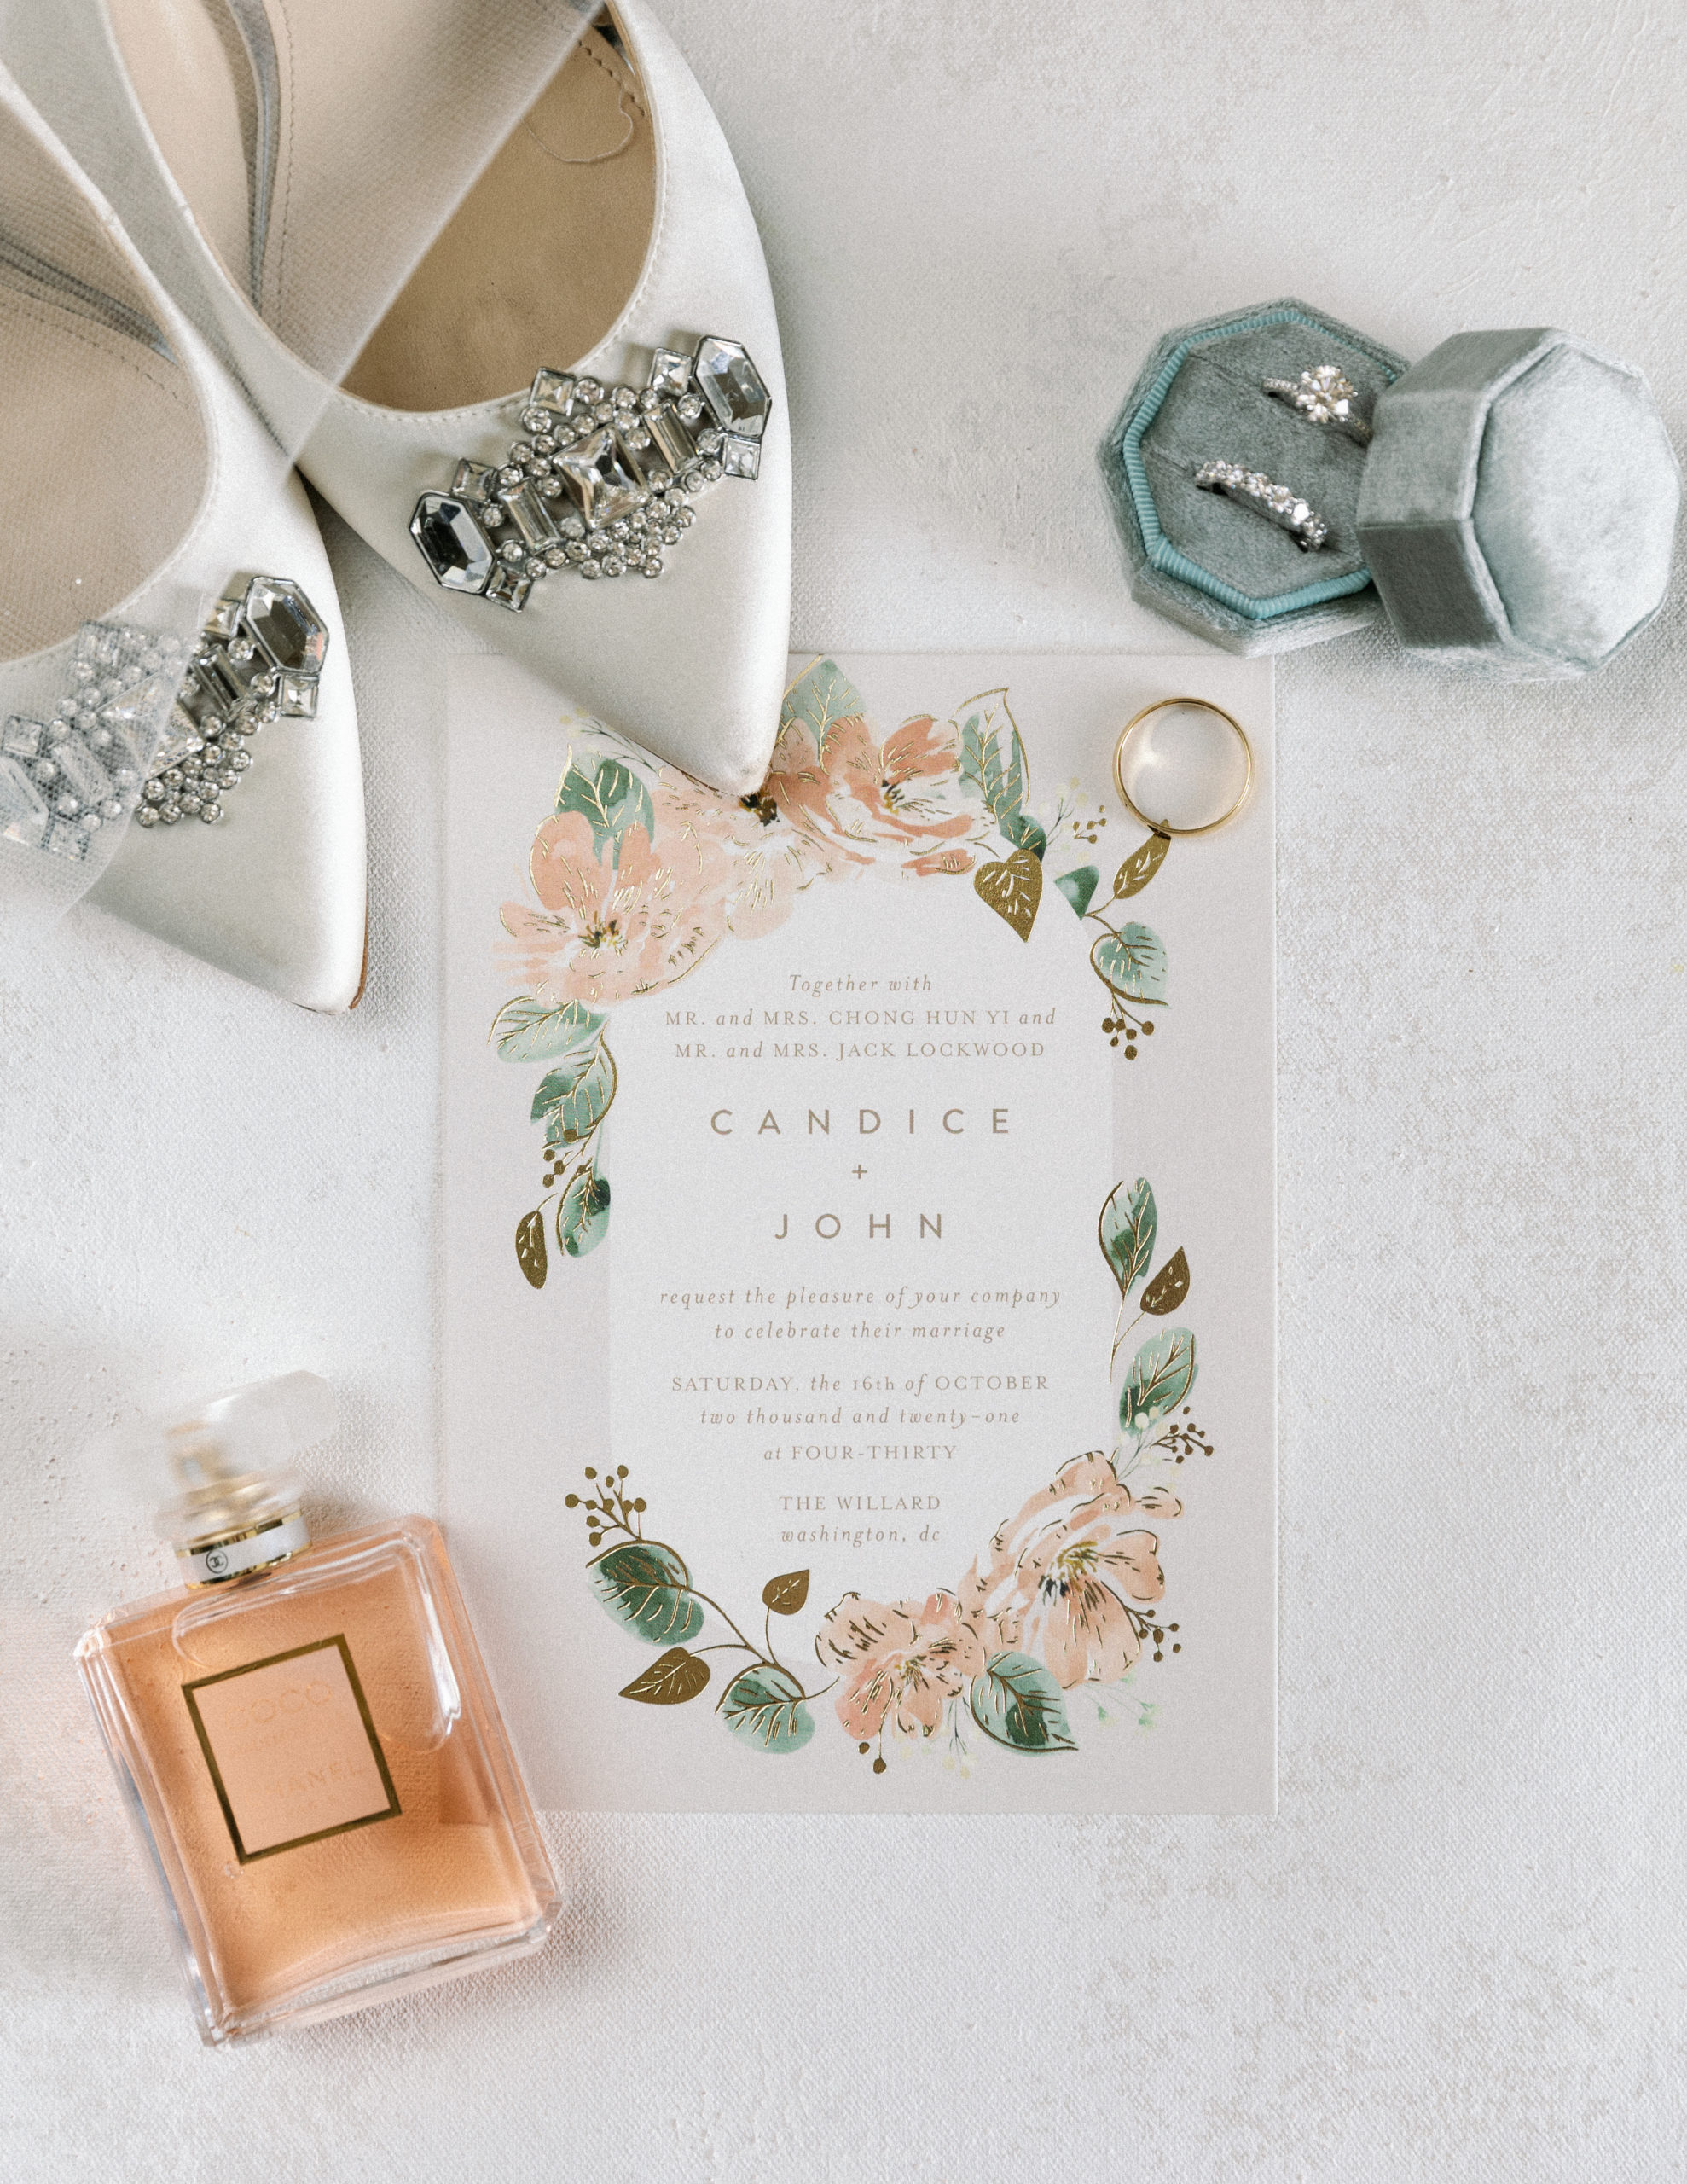 Flat-lay photo of the wedding invitation with artistic floral illustrations laid with a perfume bottle, wedding rings, and the bride's wedding shoes